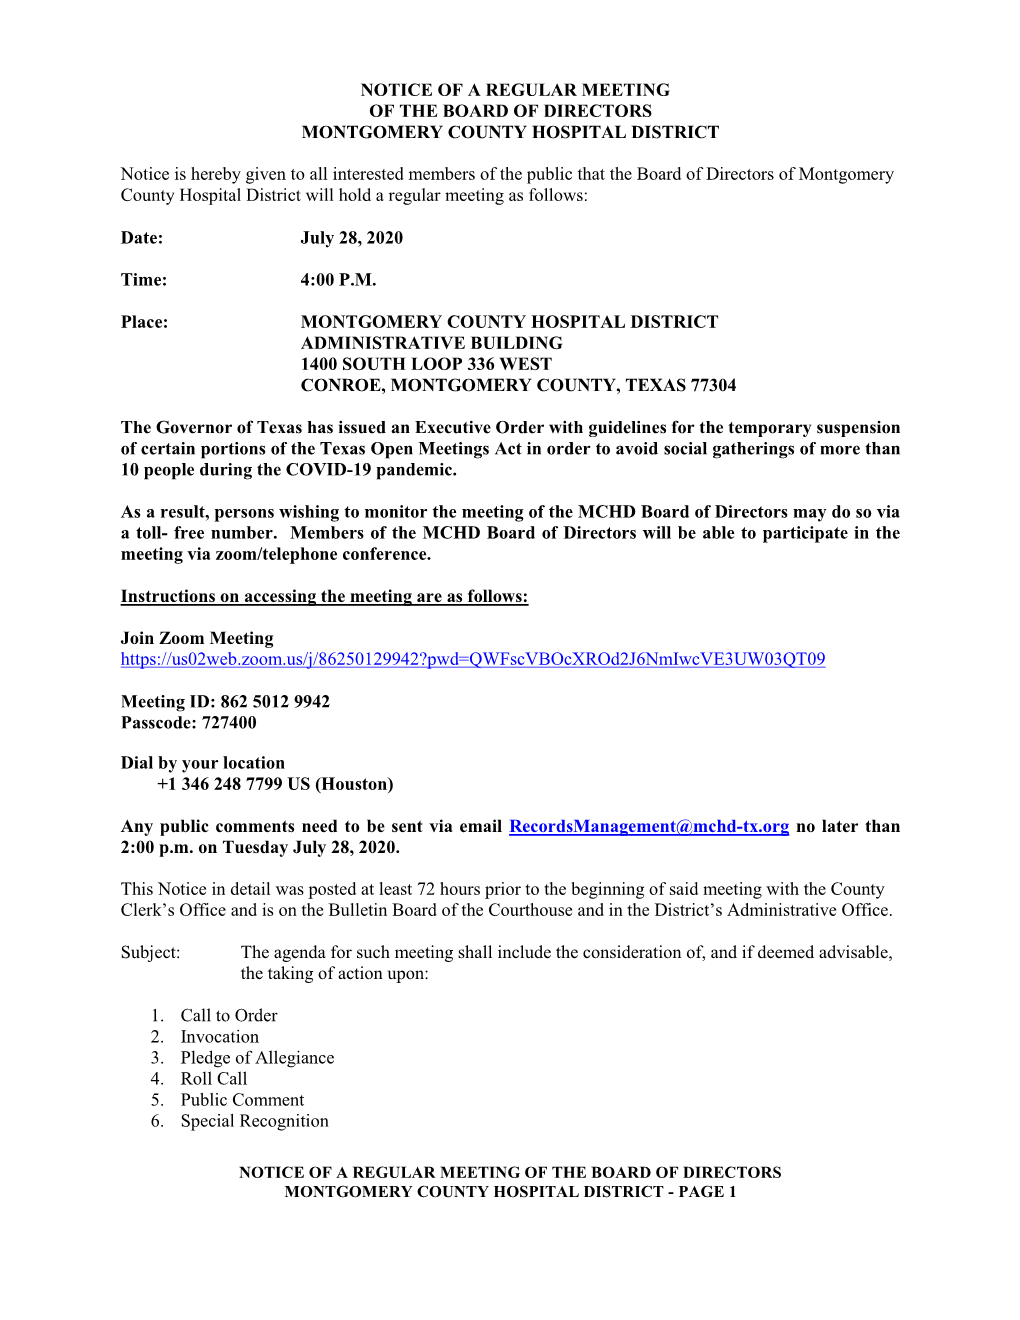 Notice of a Regular Meeting of the Board of Directors Montgomery County Hospital District